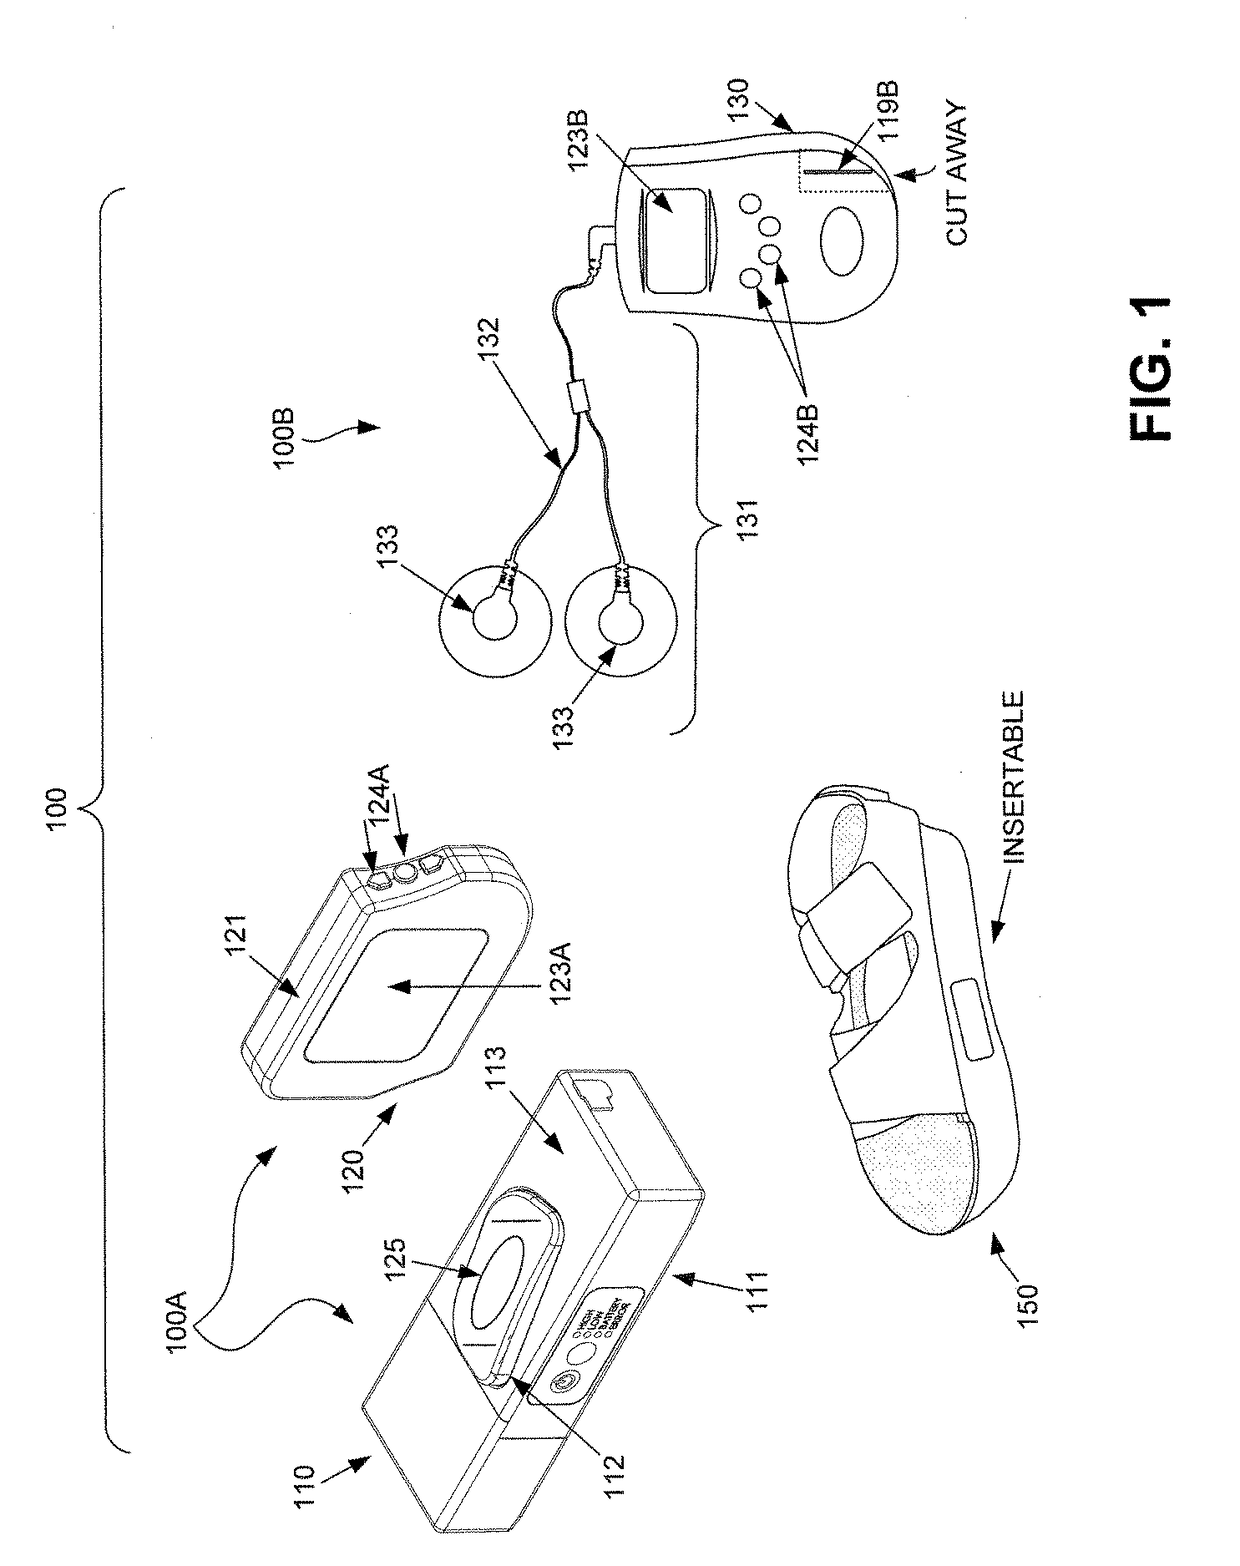 Foot compression and electrical stimulation system